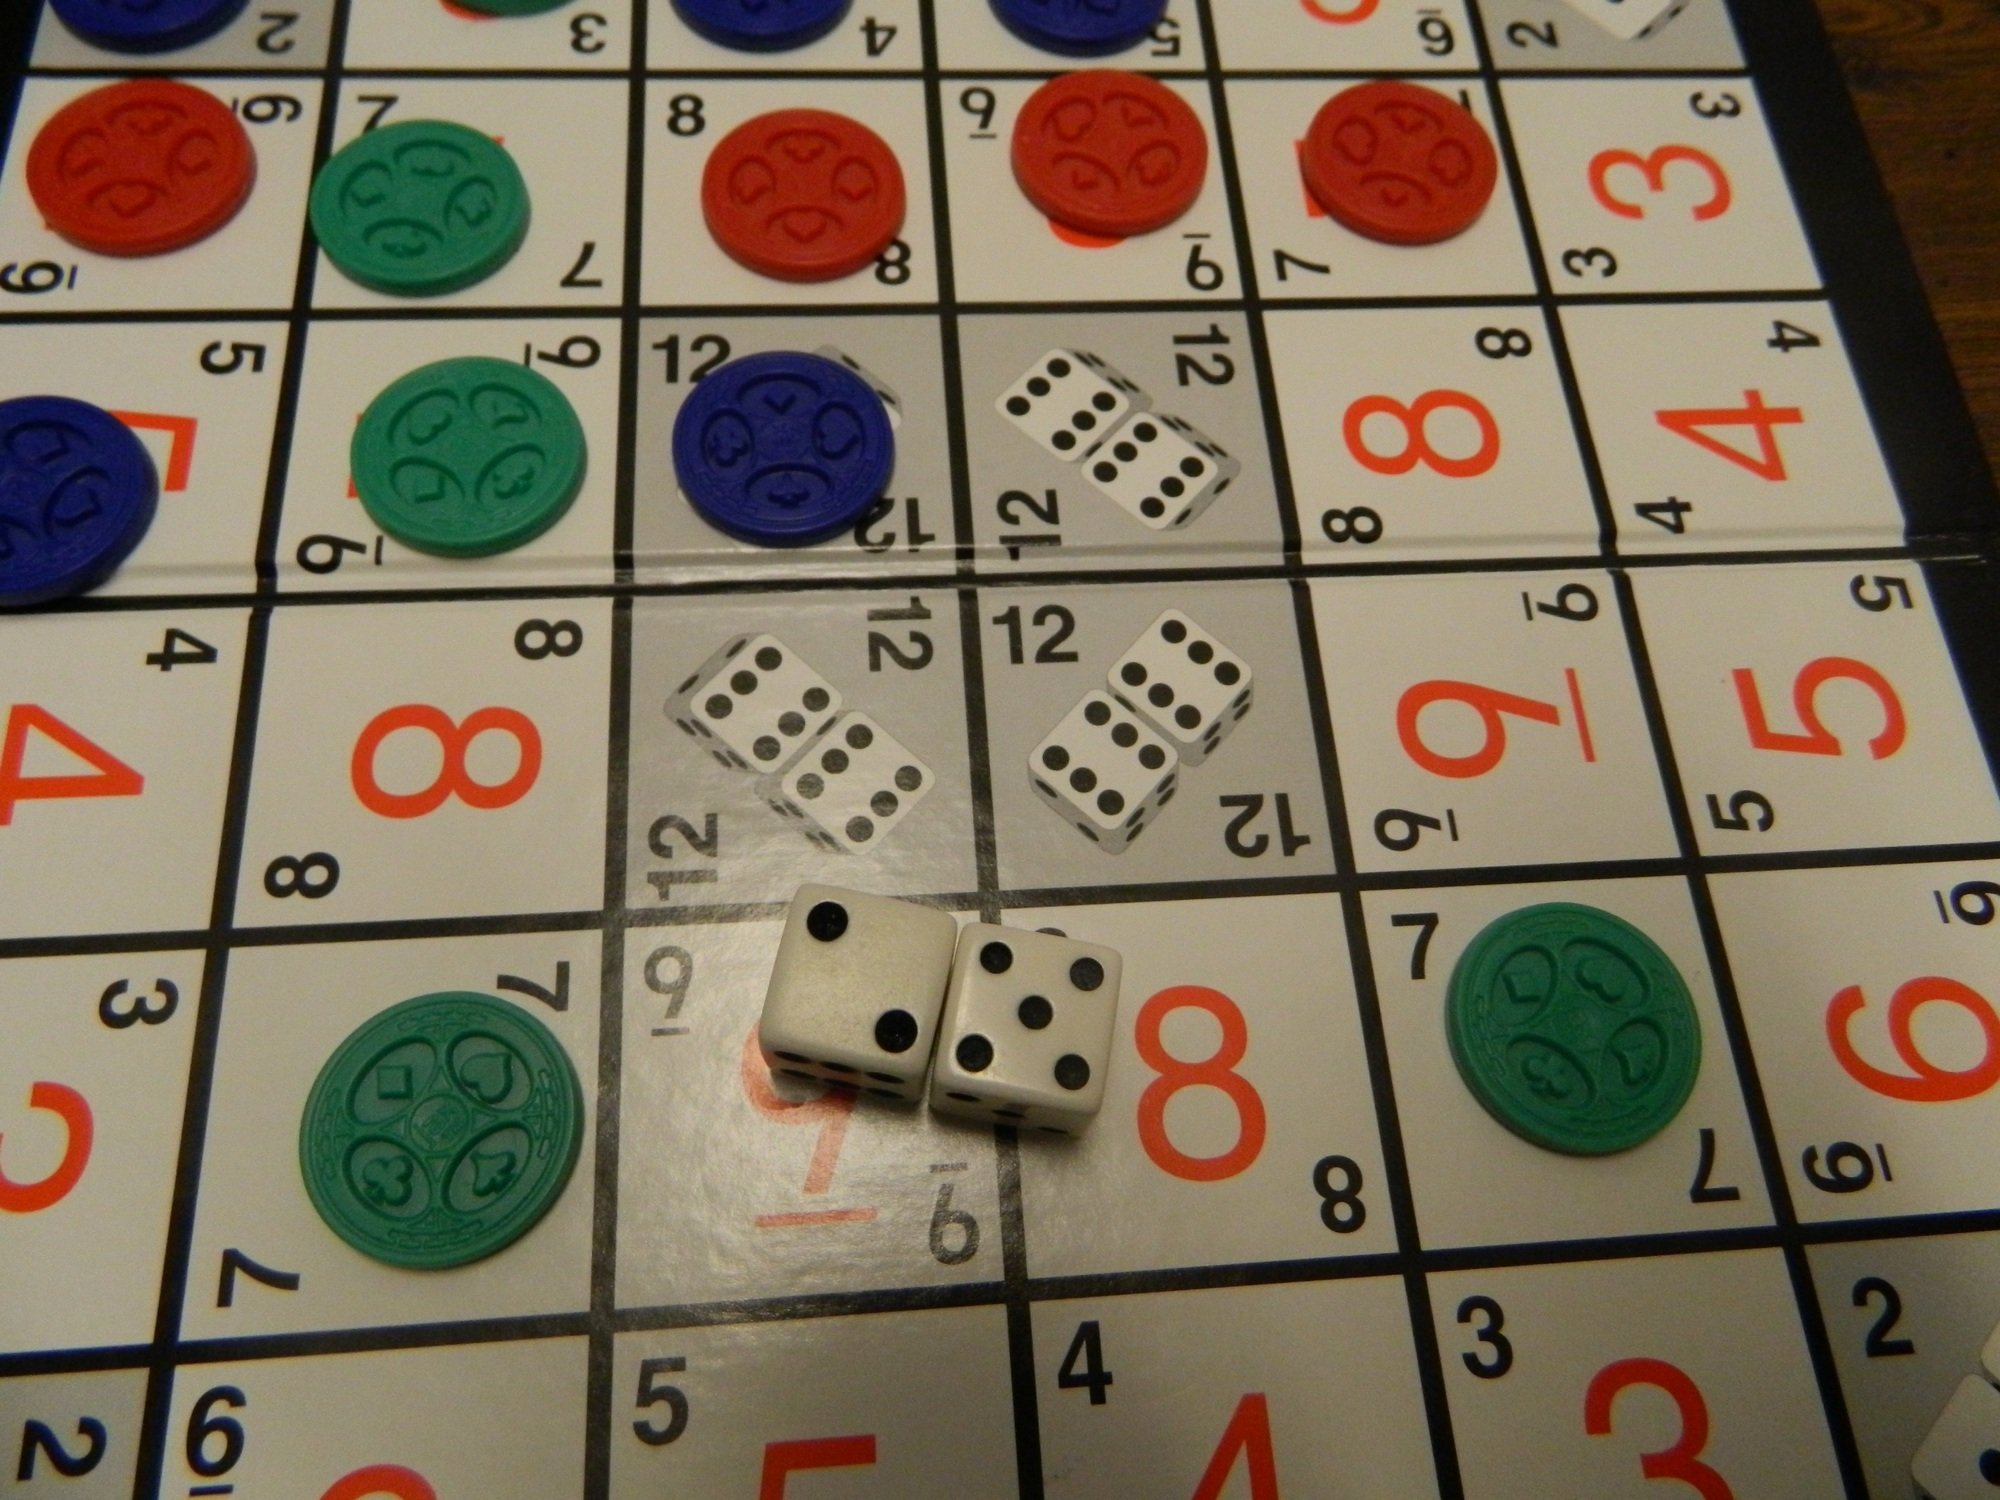 Sequence Dice Board Game Review and Rules Geeky Hobbies.